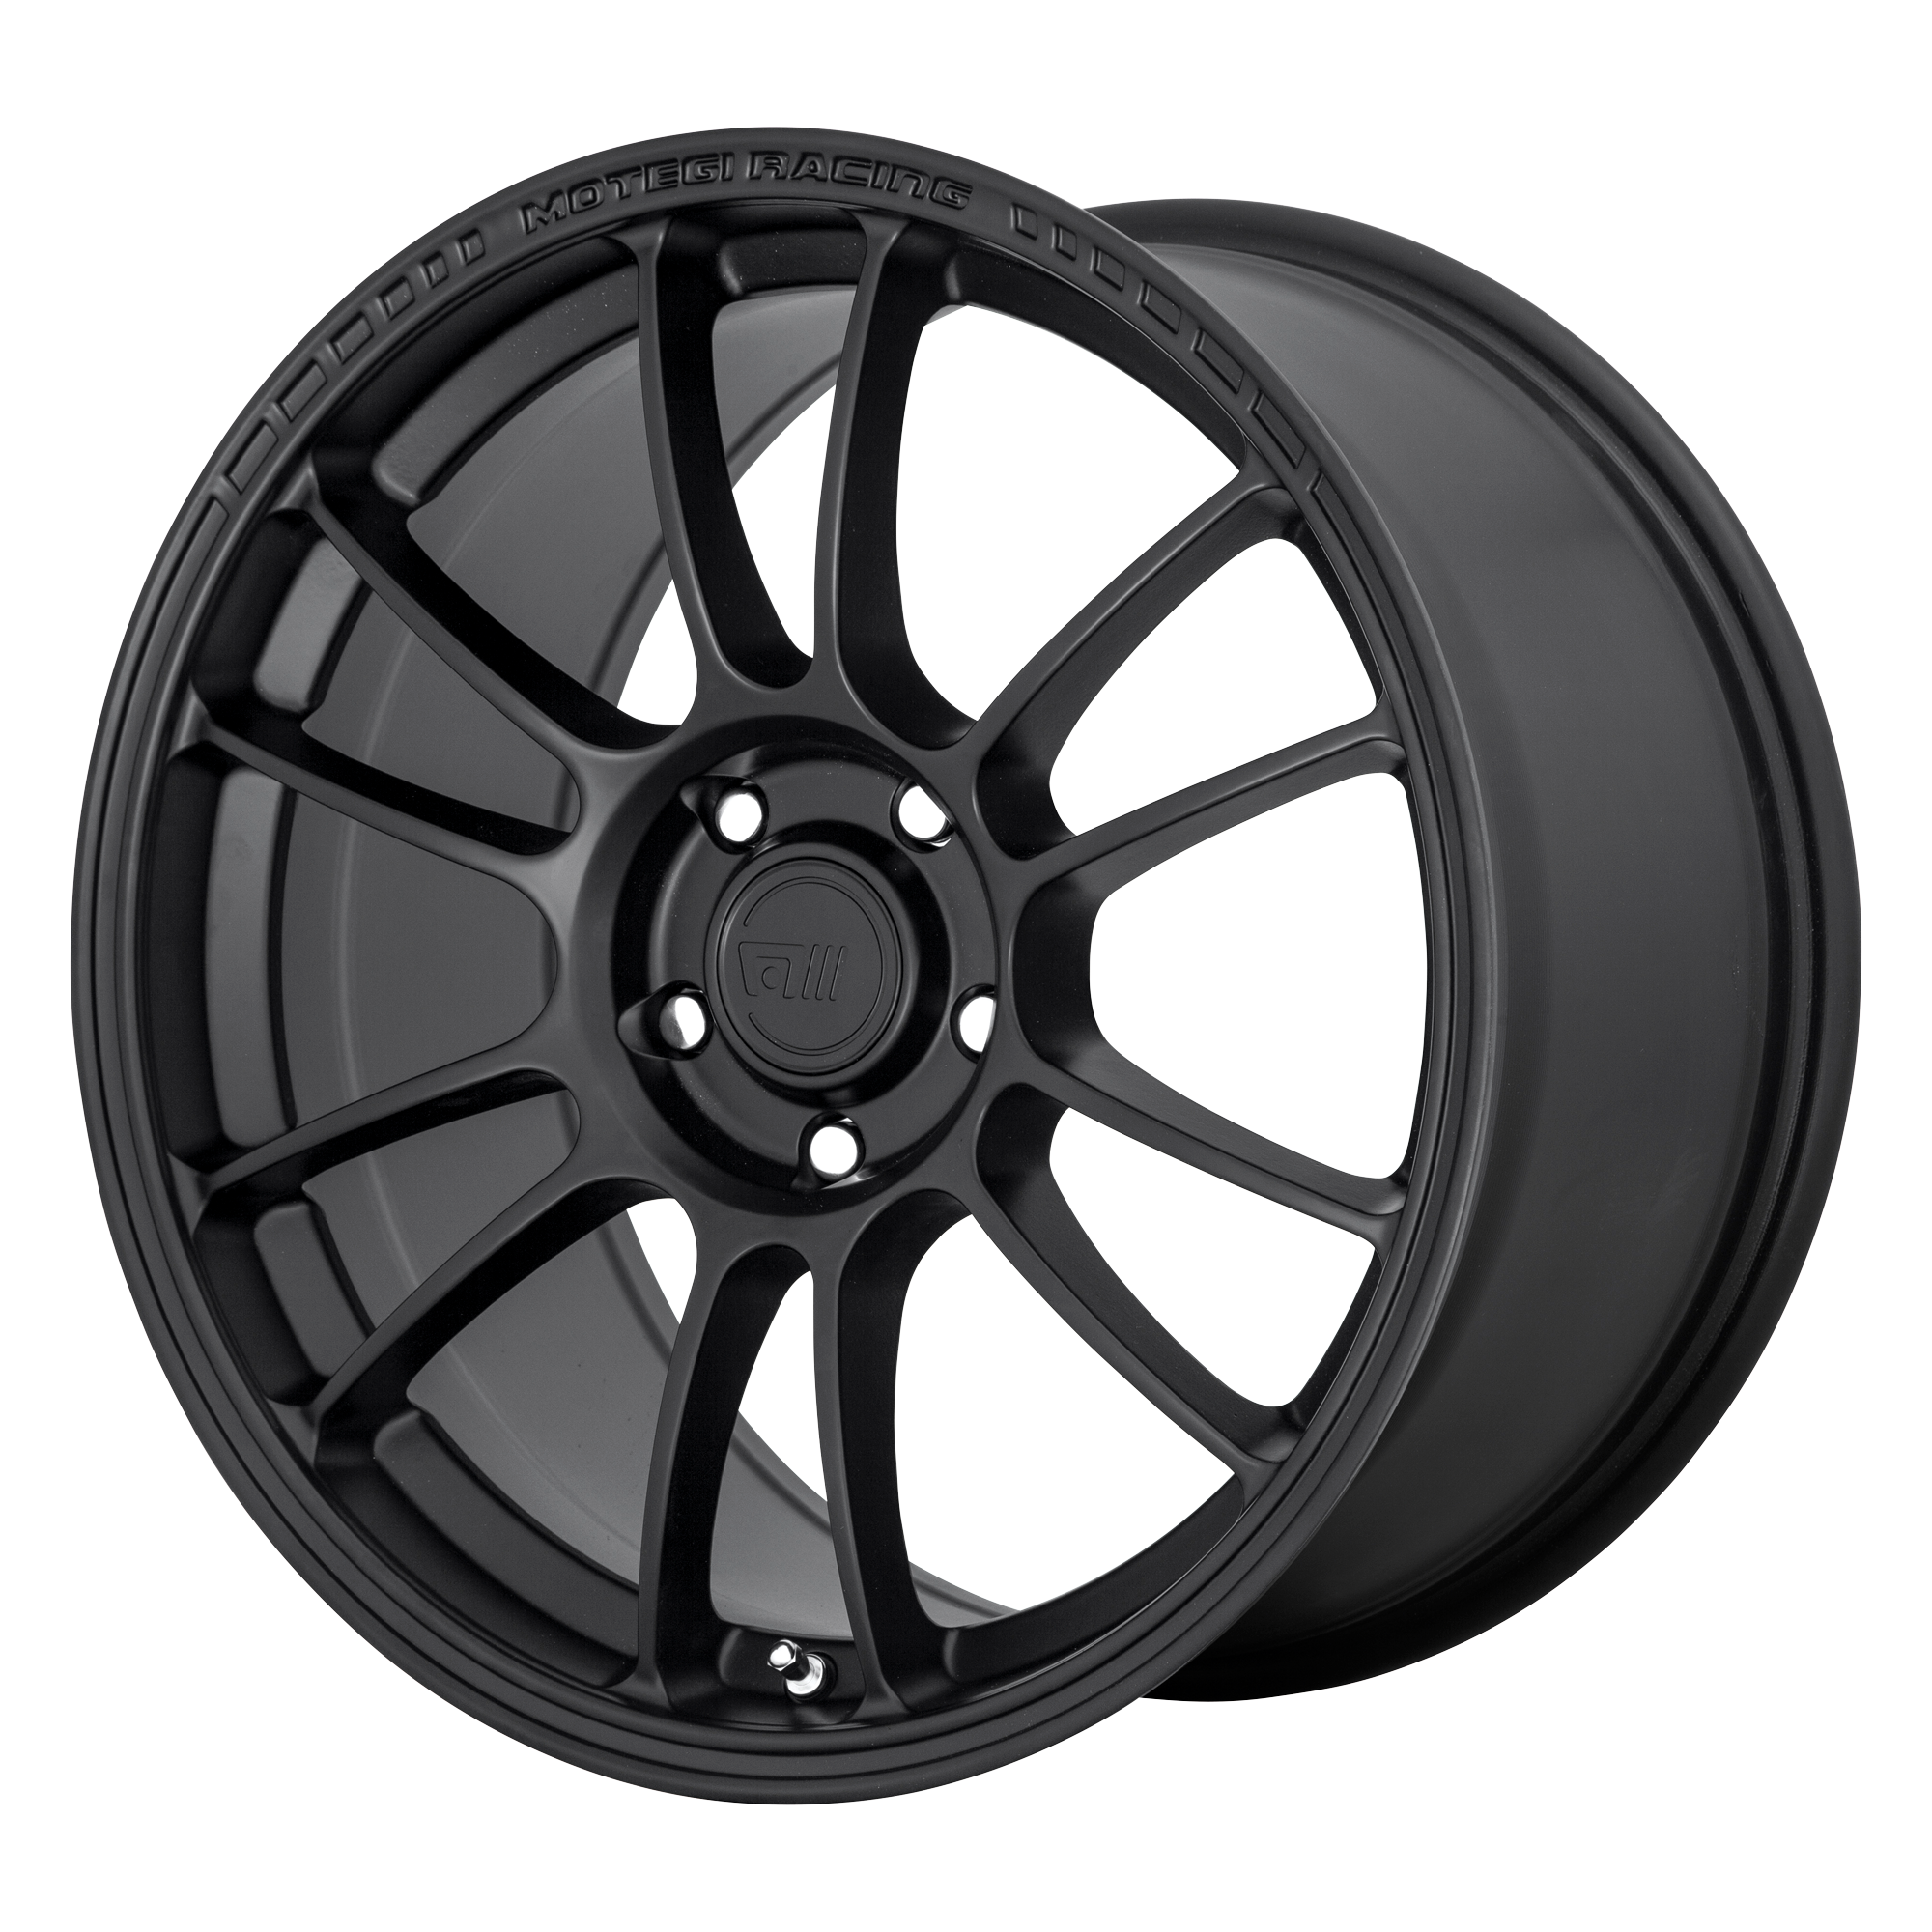 SS6 17x7 5x112.00 SATIN BLACK (42 mm) - Tires and Engine Performance